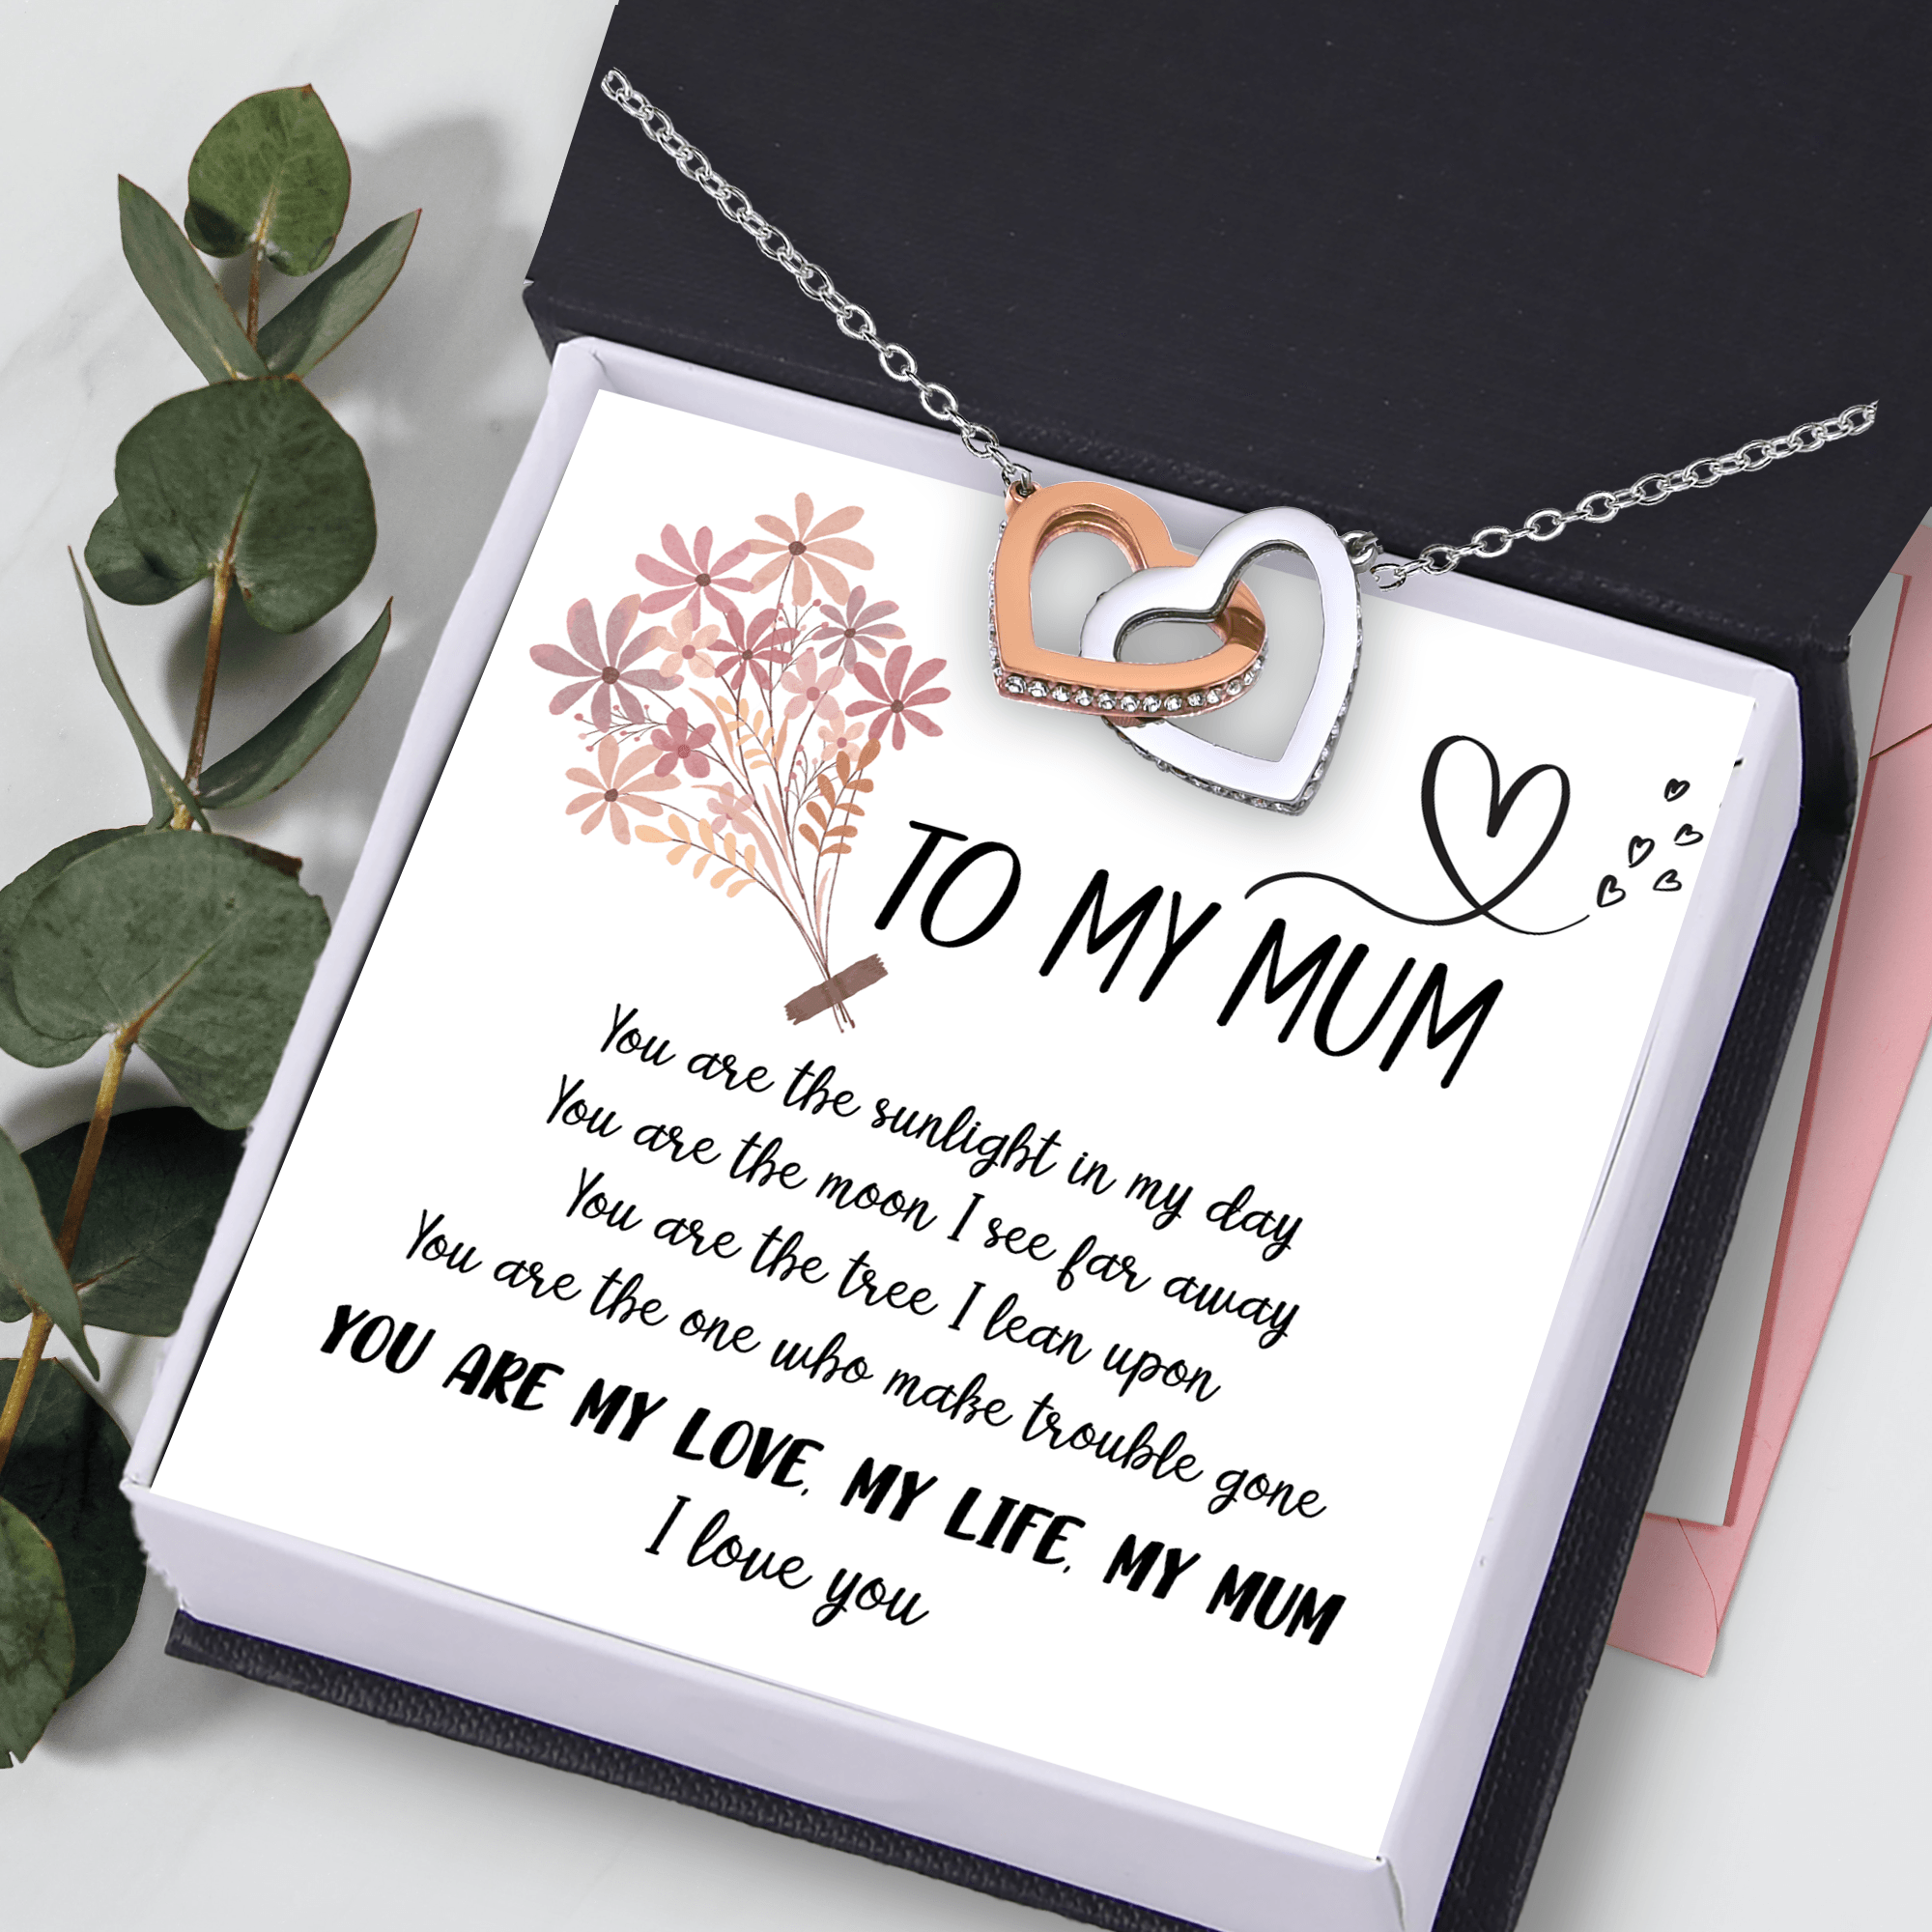 Interlocked Heart Necklace - Family - To My Mum - You Are The One Who Make Trouble Gone - Augnp19009 - Gifts Holder